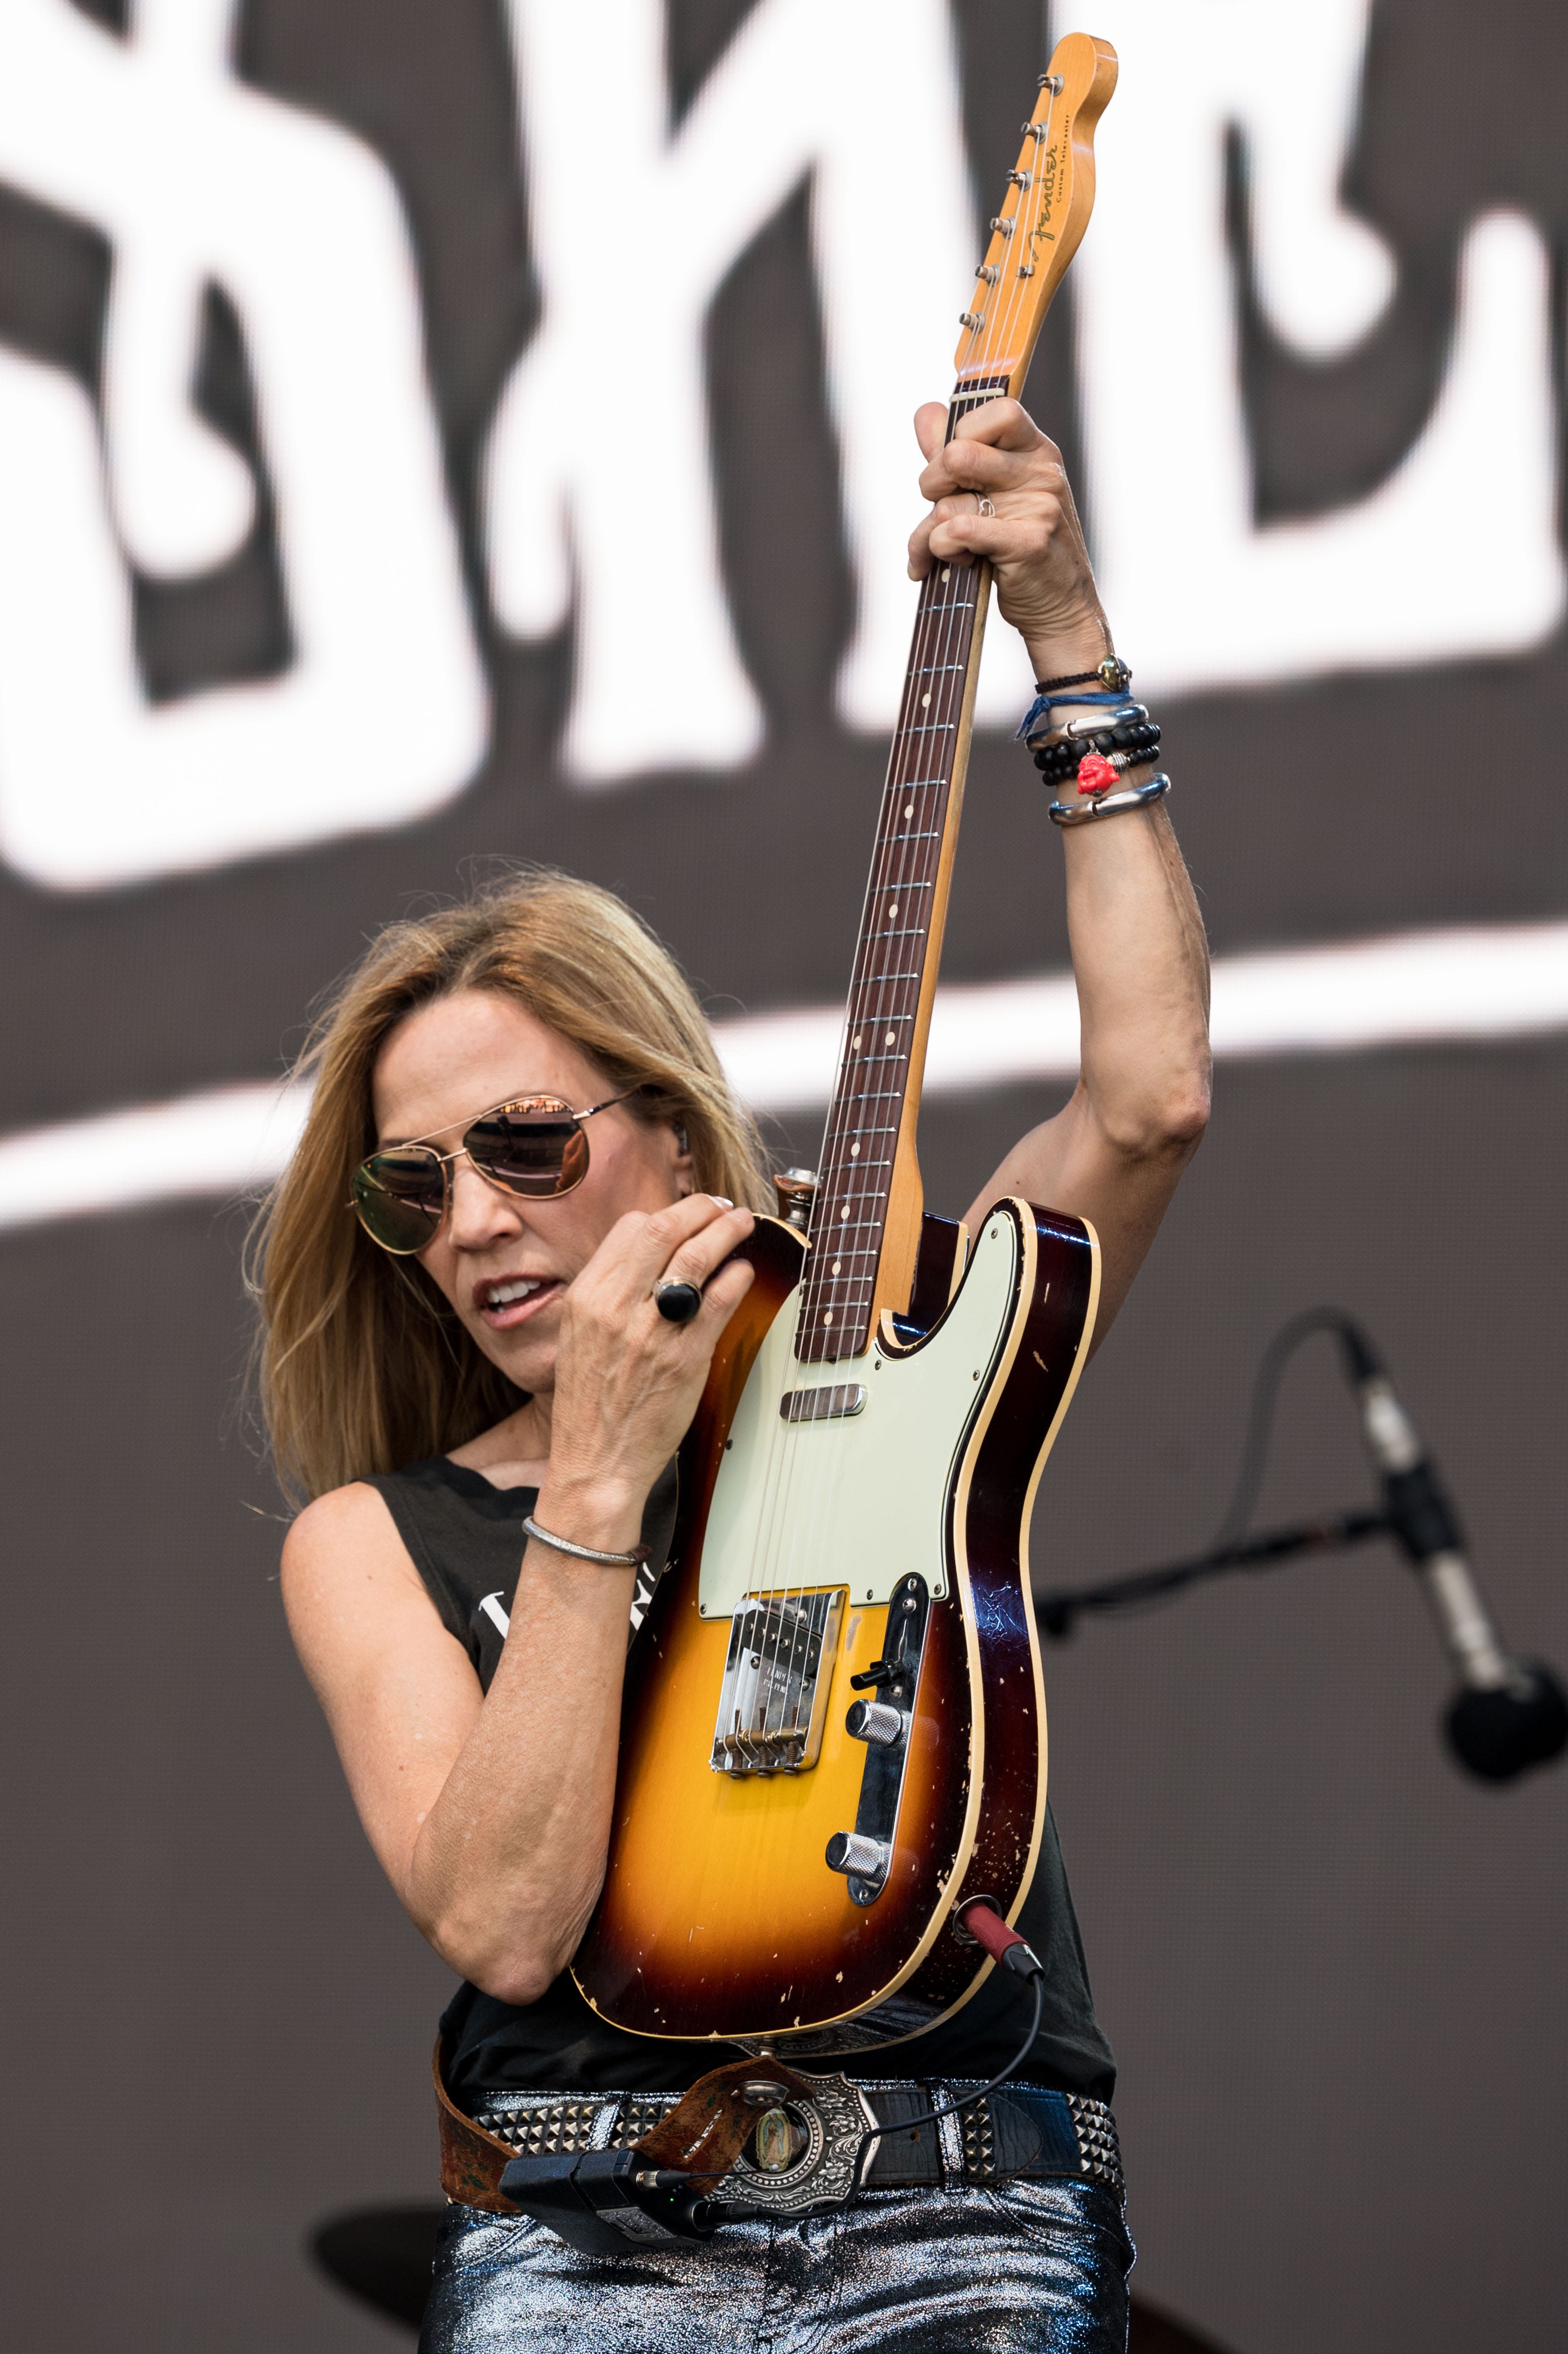 Sheryl Crow bought a Fender Buck Owens Telecaster when she stopped in on her way to a Buffalo gig in 2013.